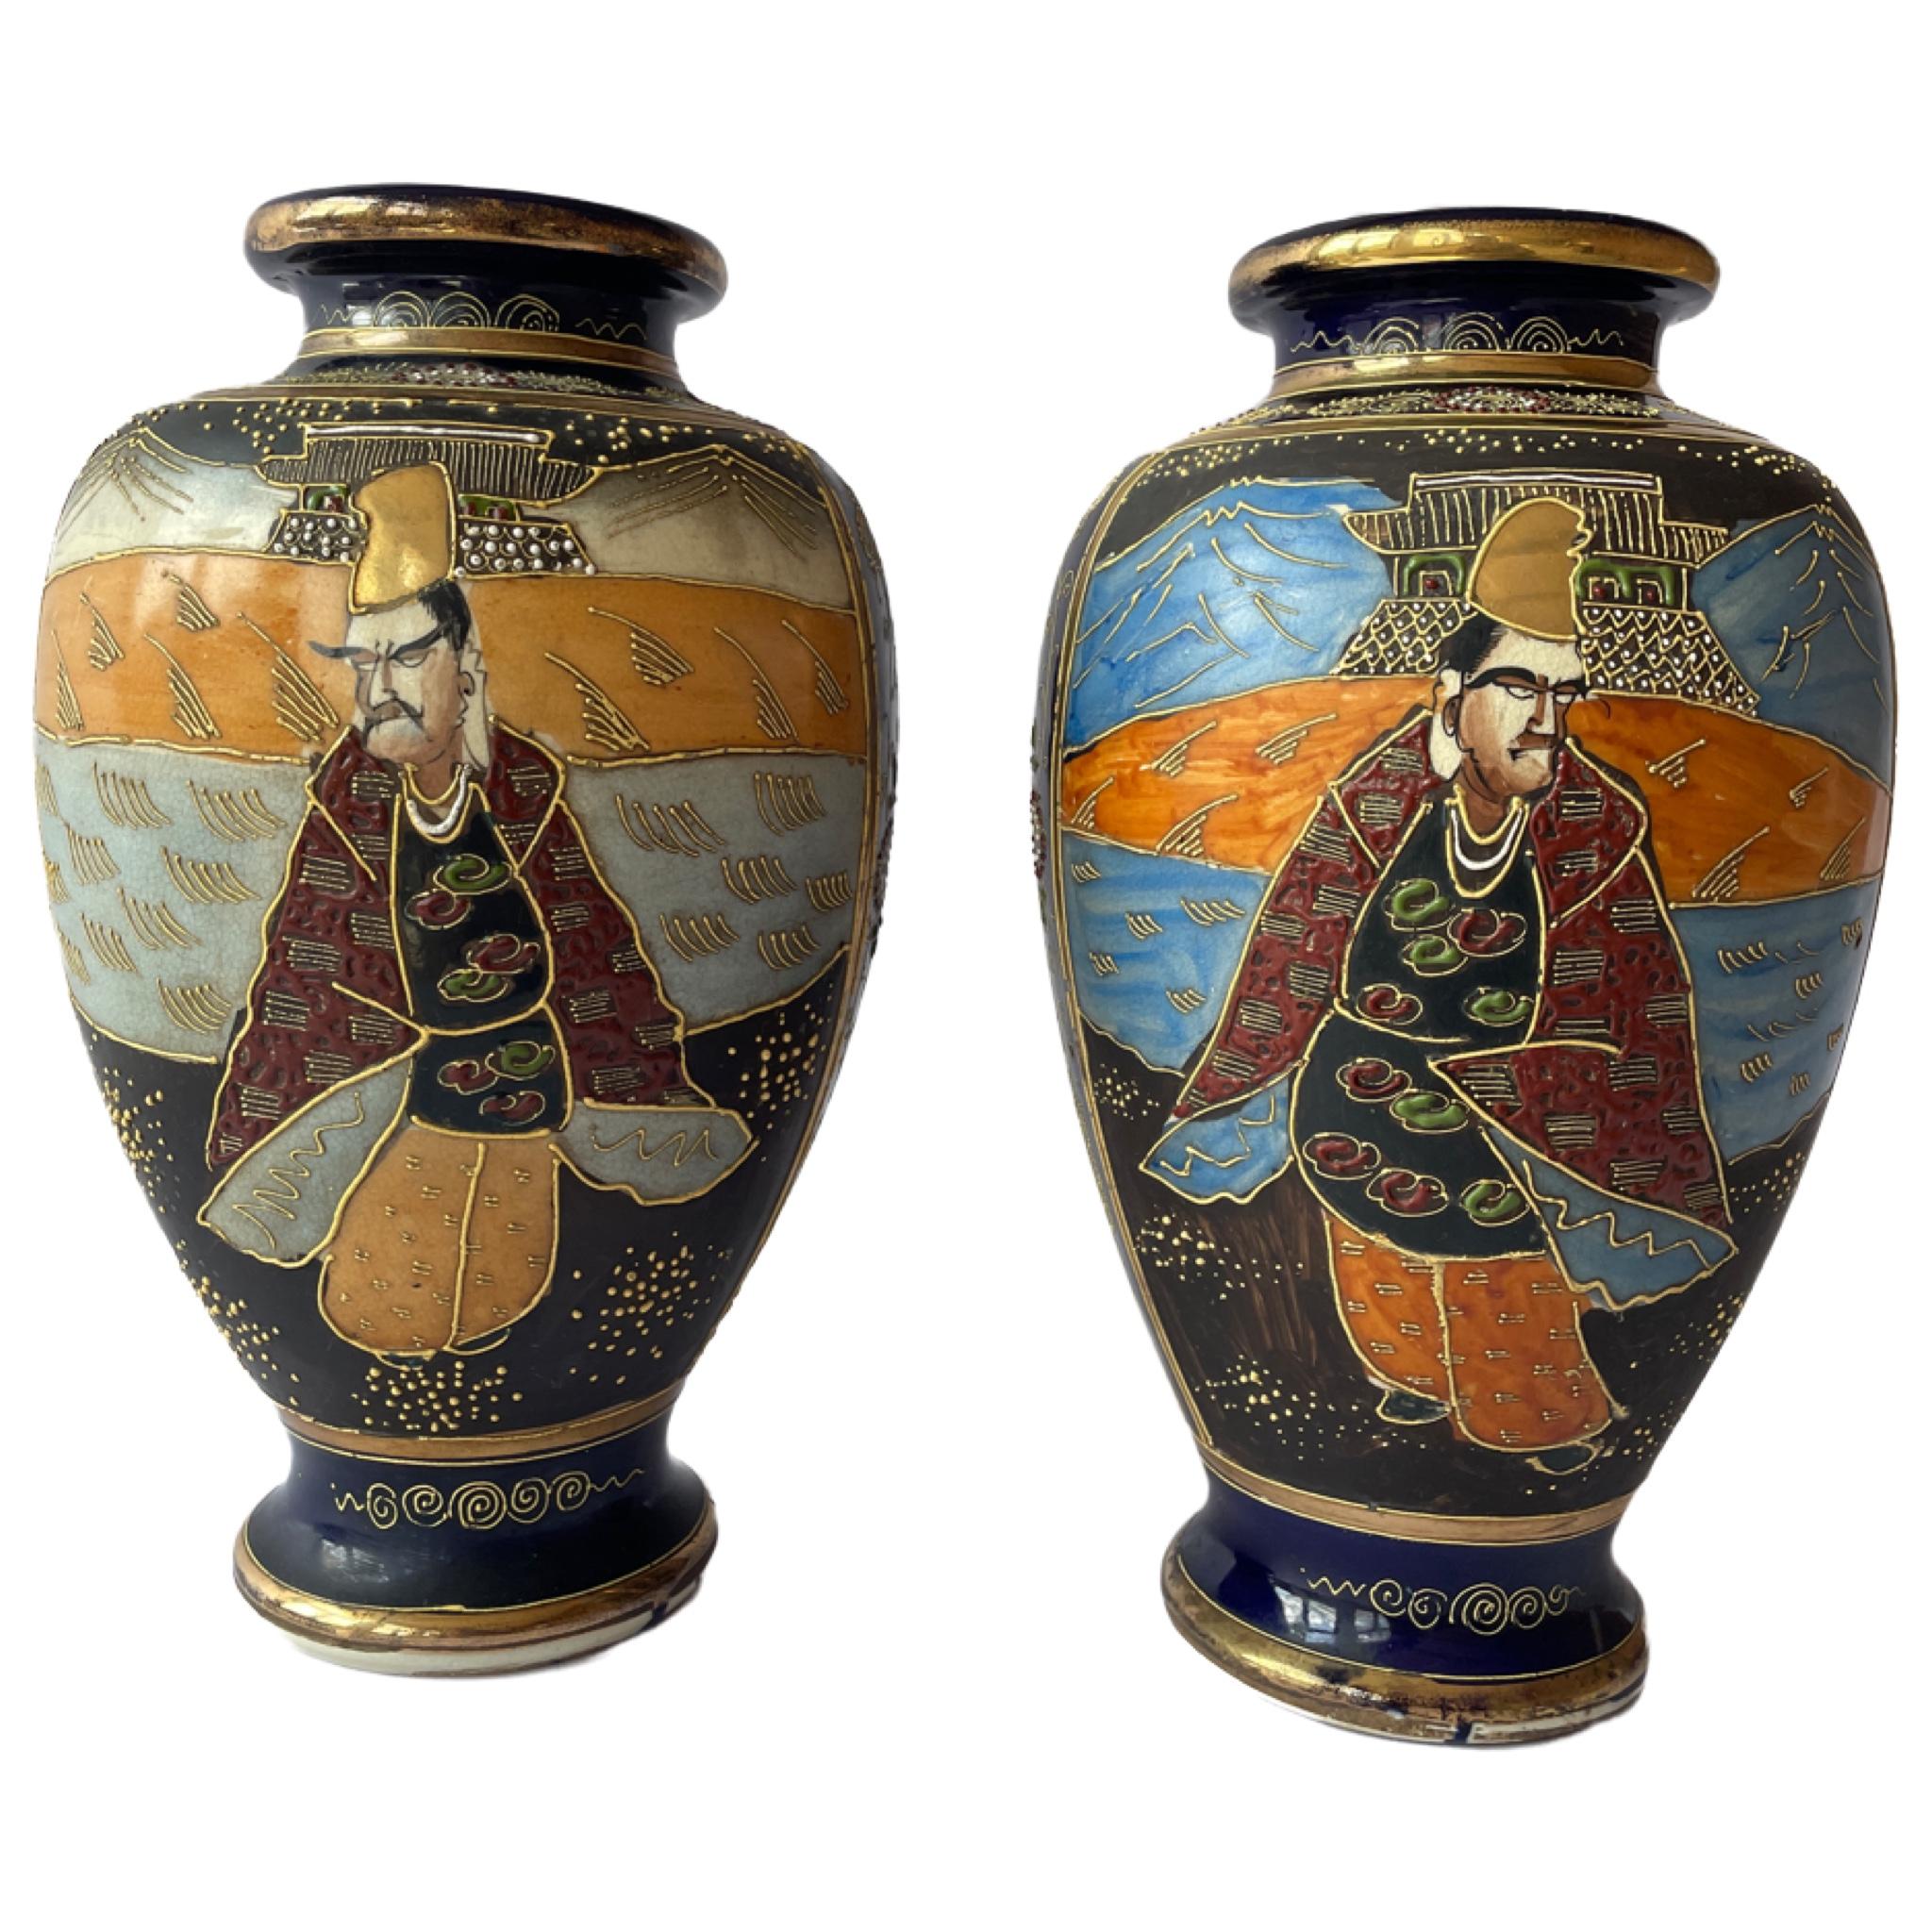 Japanese Satsuma vases from the circa 1930-1940 period are a particular style of ceramic art that originated from the Satsuma province of Japan. Satsuma ware is renowned for its intricate hand-painted designs, rich colors, and distinctive crackled